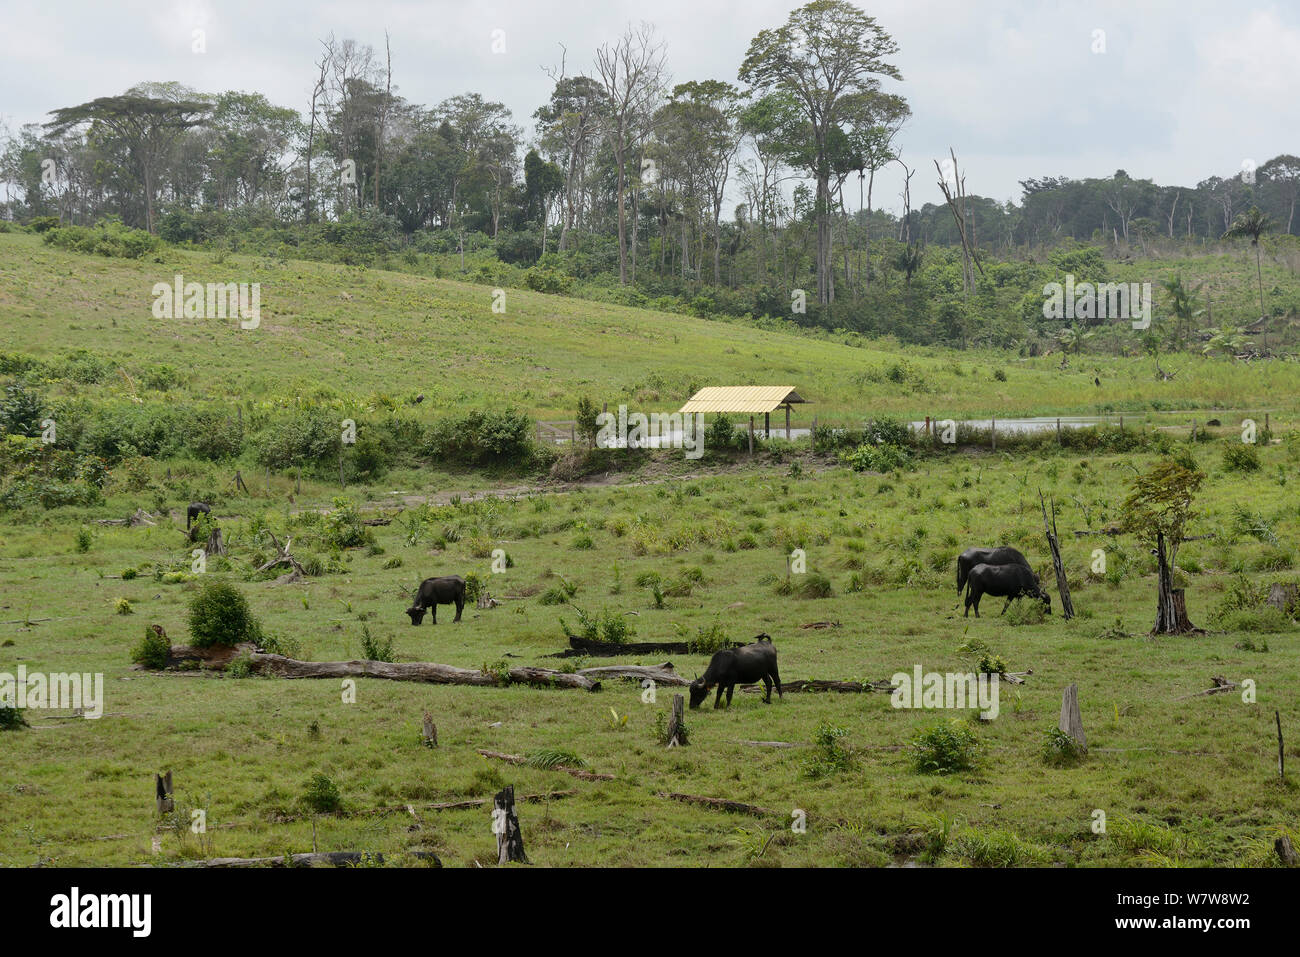 Domestic water buffalo (Bubalus bubalis) introduced species grazing in area deforested of primary rainforest, French Guiana. Stock Photo